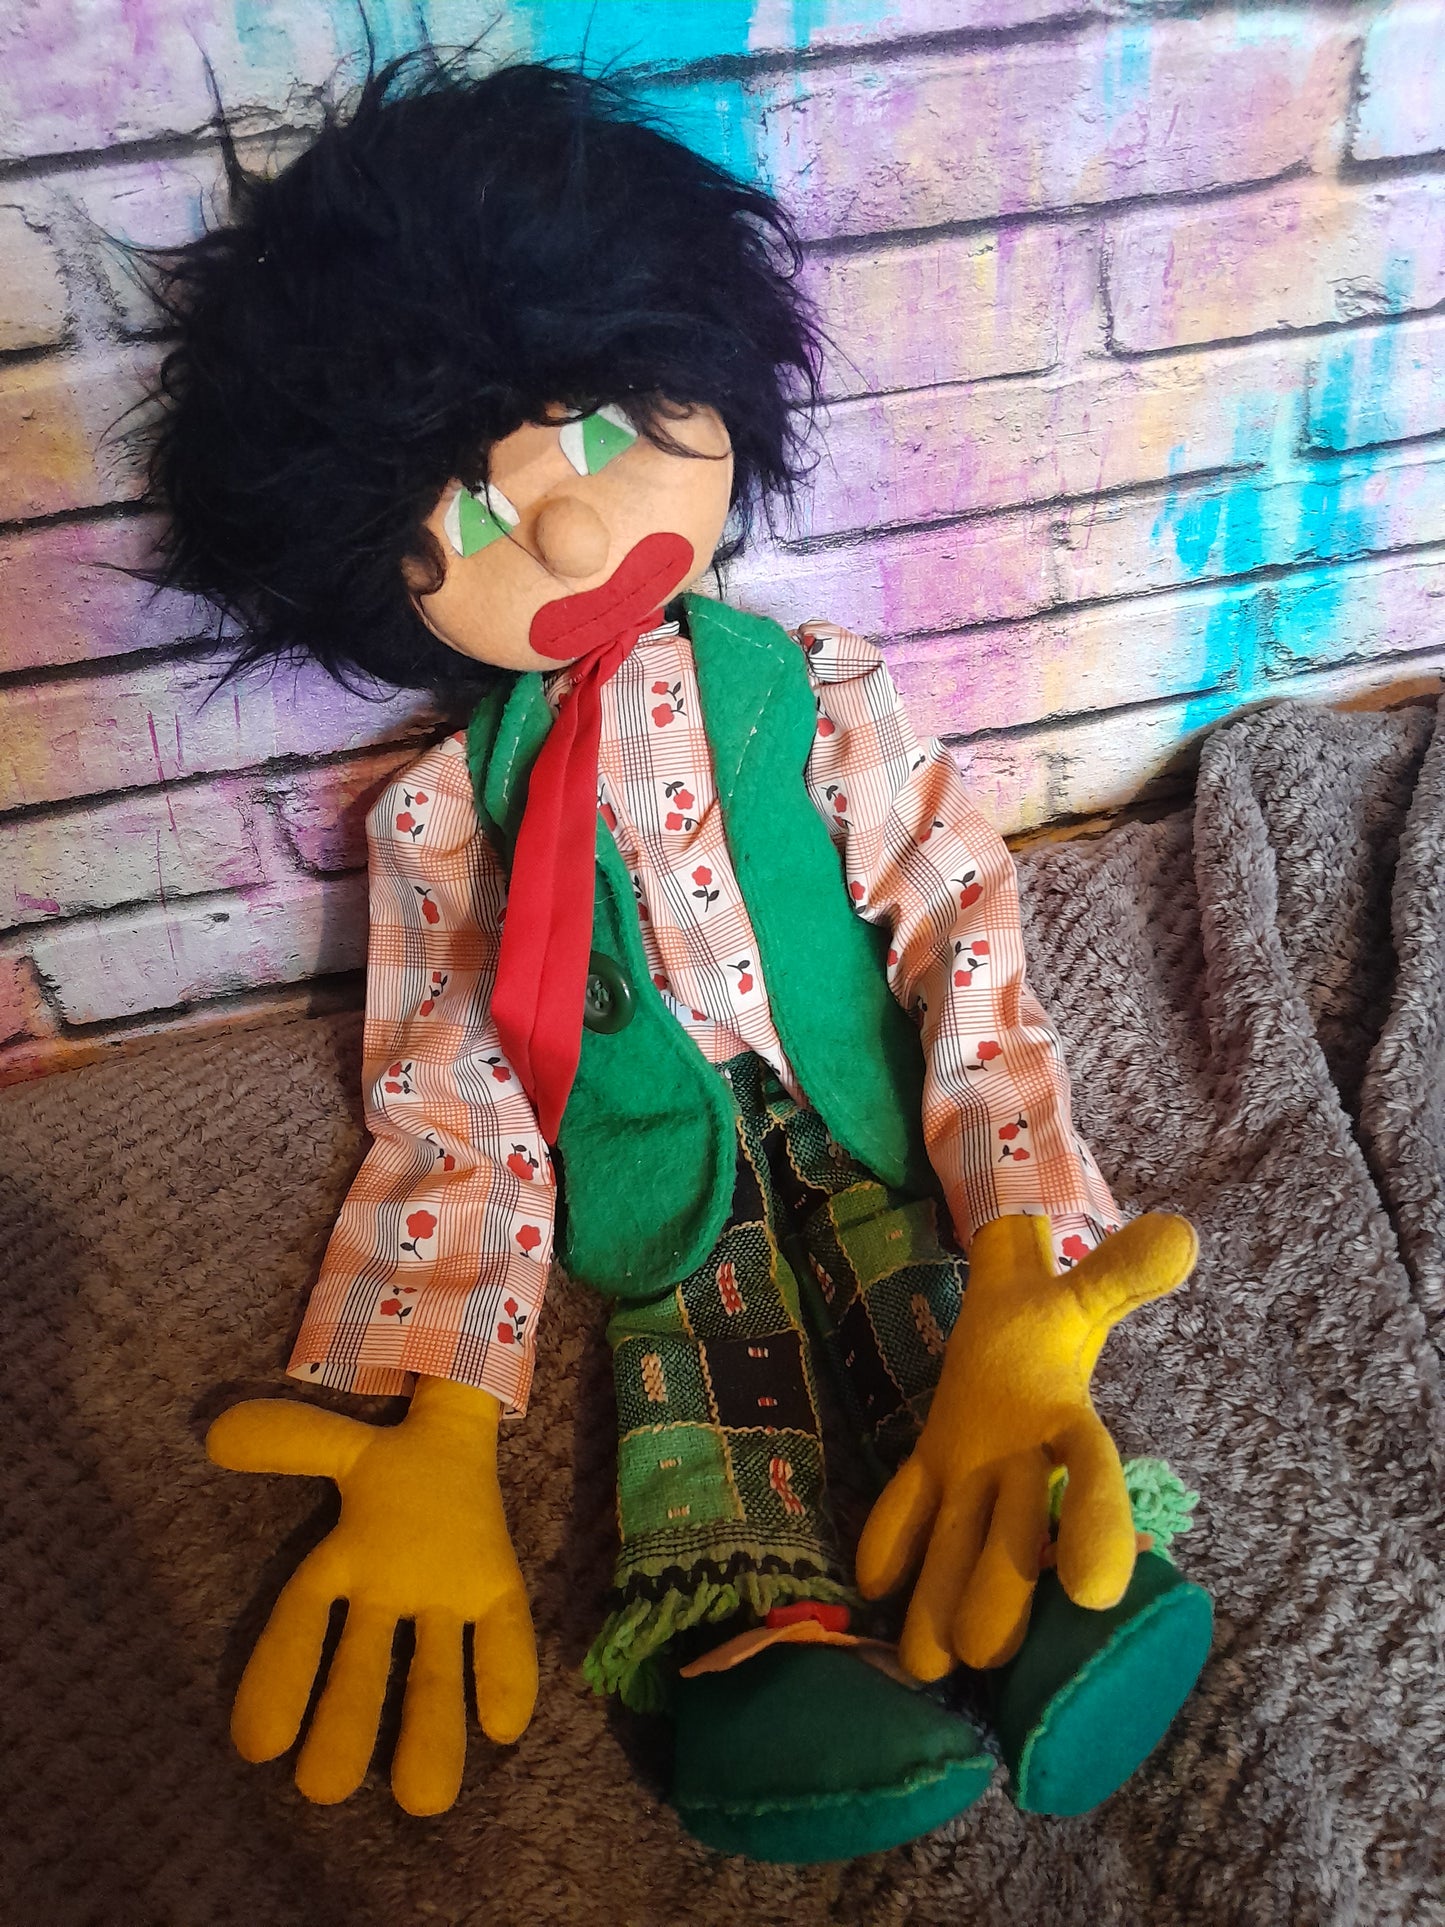 Giant hands doll